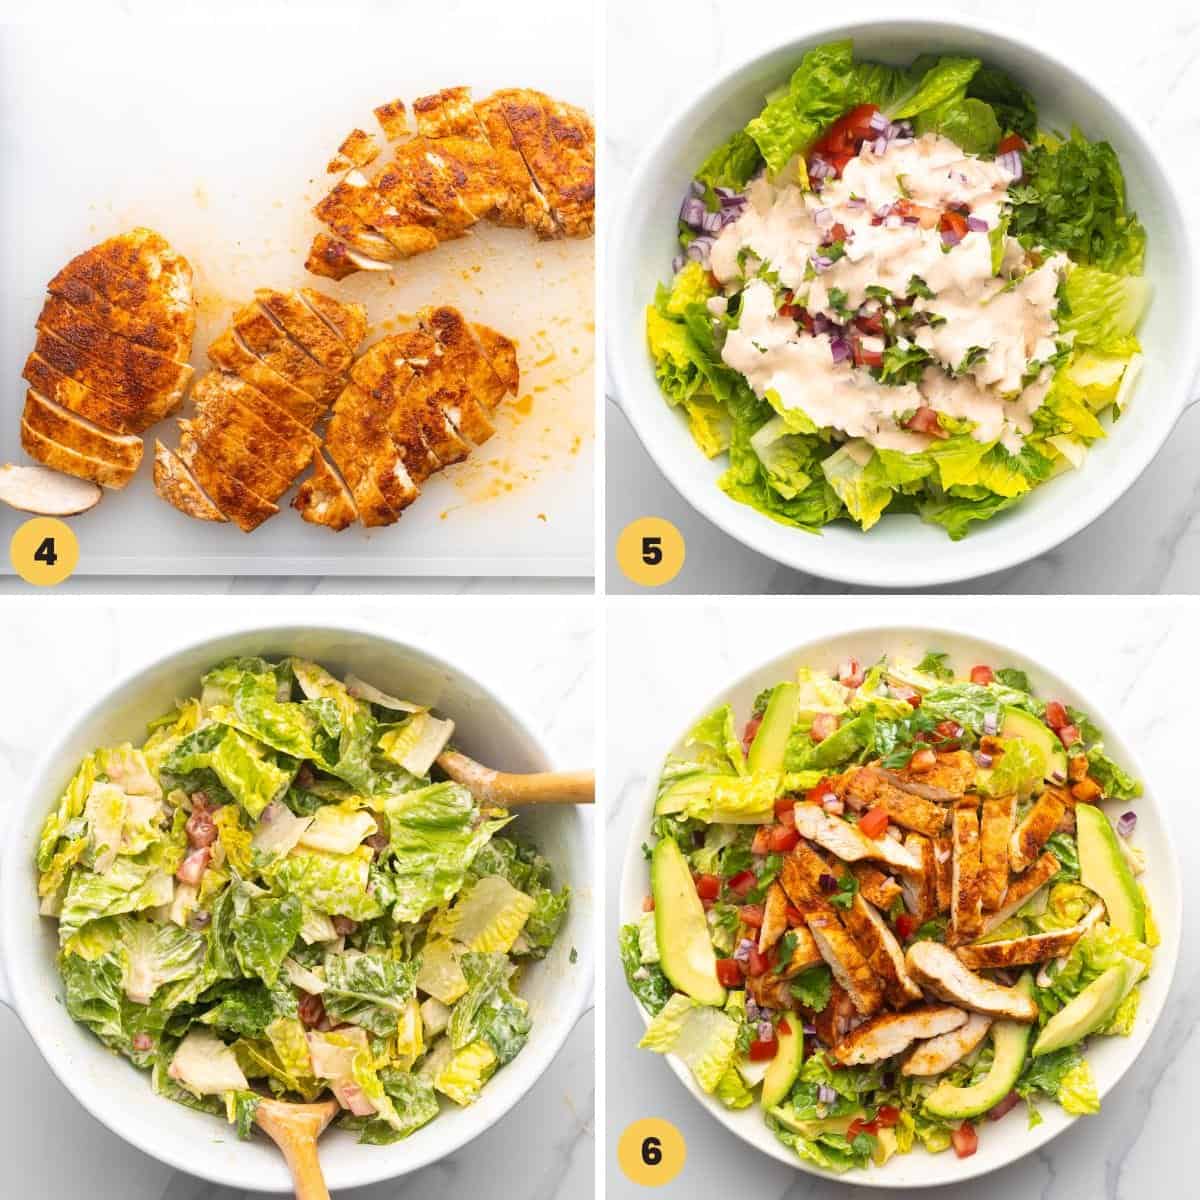 A collage of four images showing how to assemble a santa fe chicken salad.